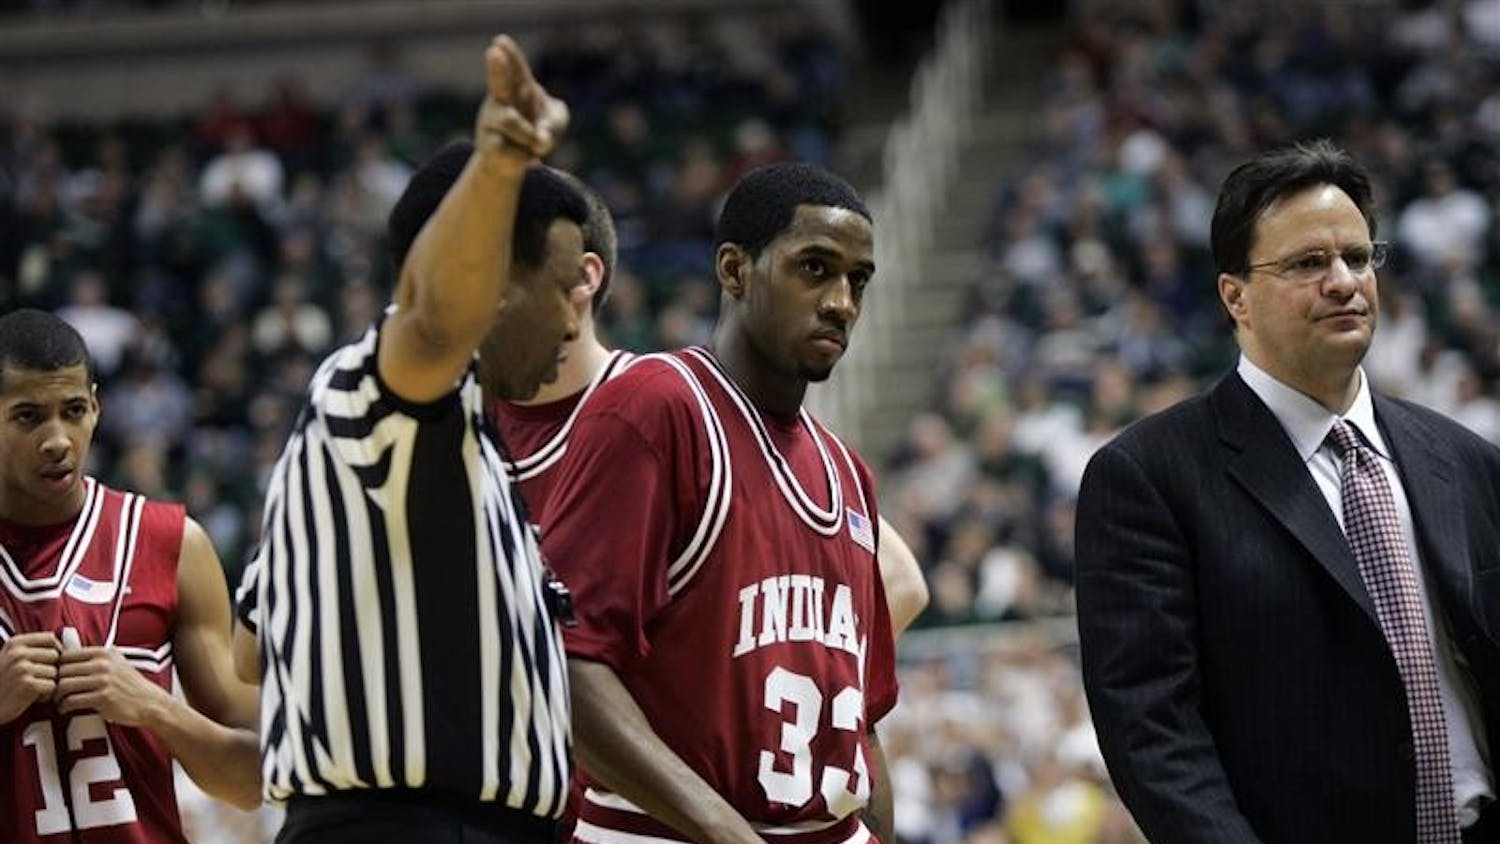 Referee Ed Hightower signals that junior guard Devan Dumes (33) has been ejected during IU's 75-47 loss to Michigan State in East Lansing, Mich. Dumes was ejected after throwing an elbow at Michigan State players.